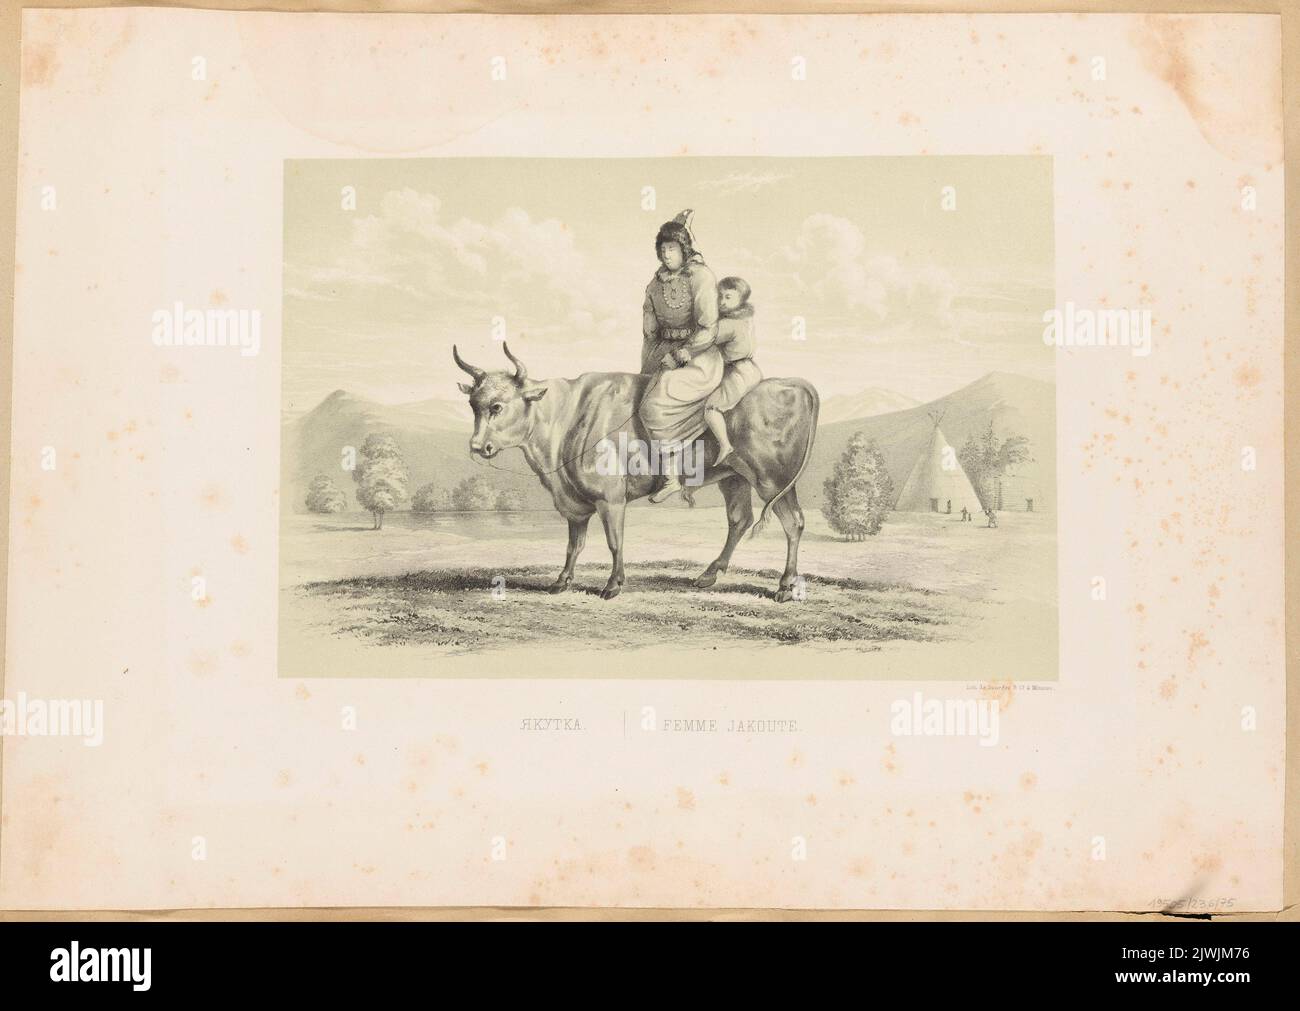 Yakut woman with a child riding an ox. Draeger, F. (Moskwa ; zakład litograficzny ; ca 1850-1860), lithography atelier, unknown, graphic artist, Niemirowski, Leopold (1810-1883), draughtsman, cartoonist Stock Photo